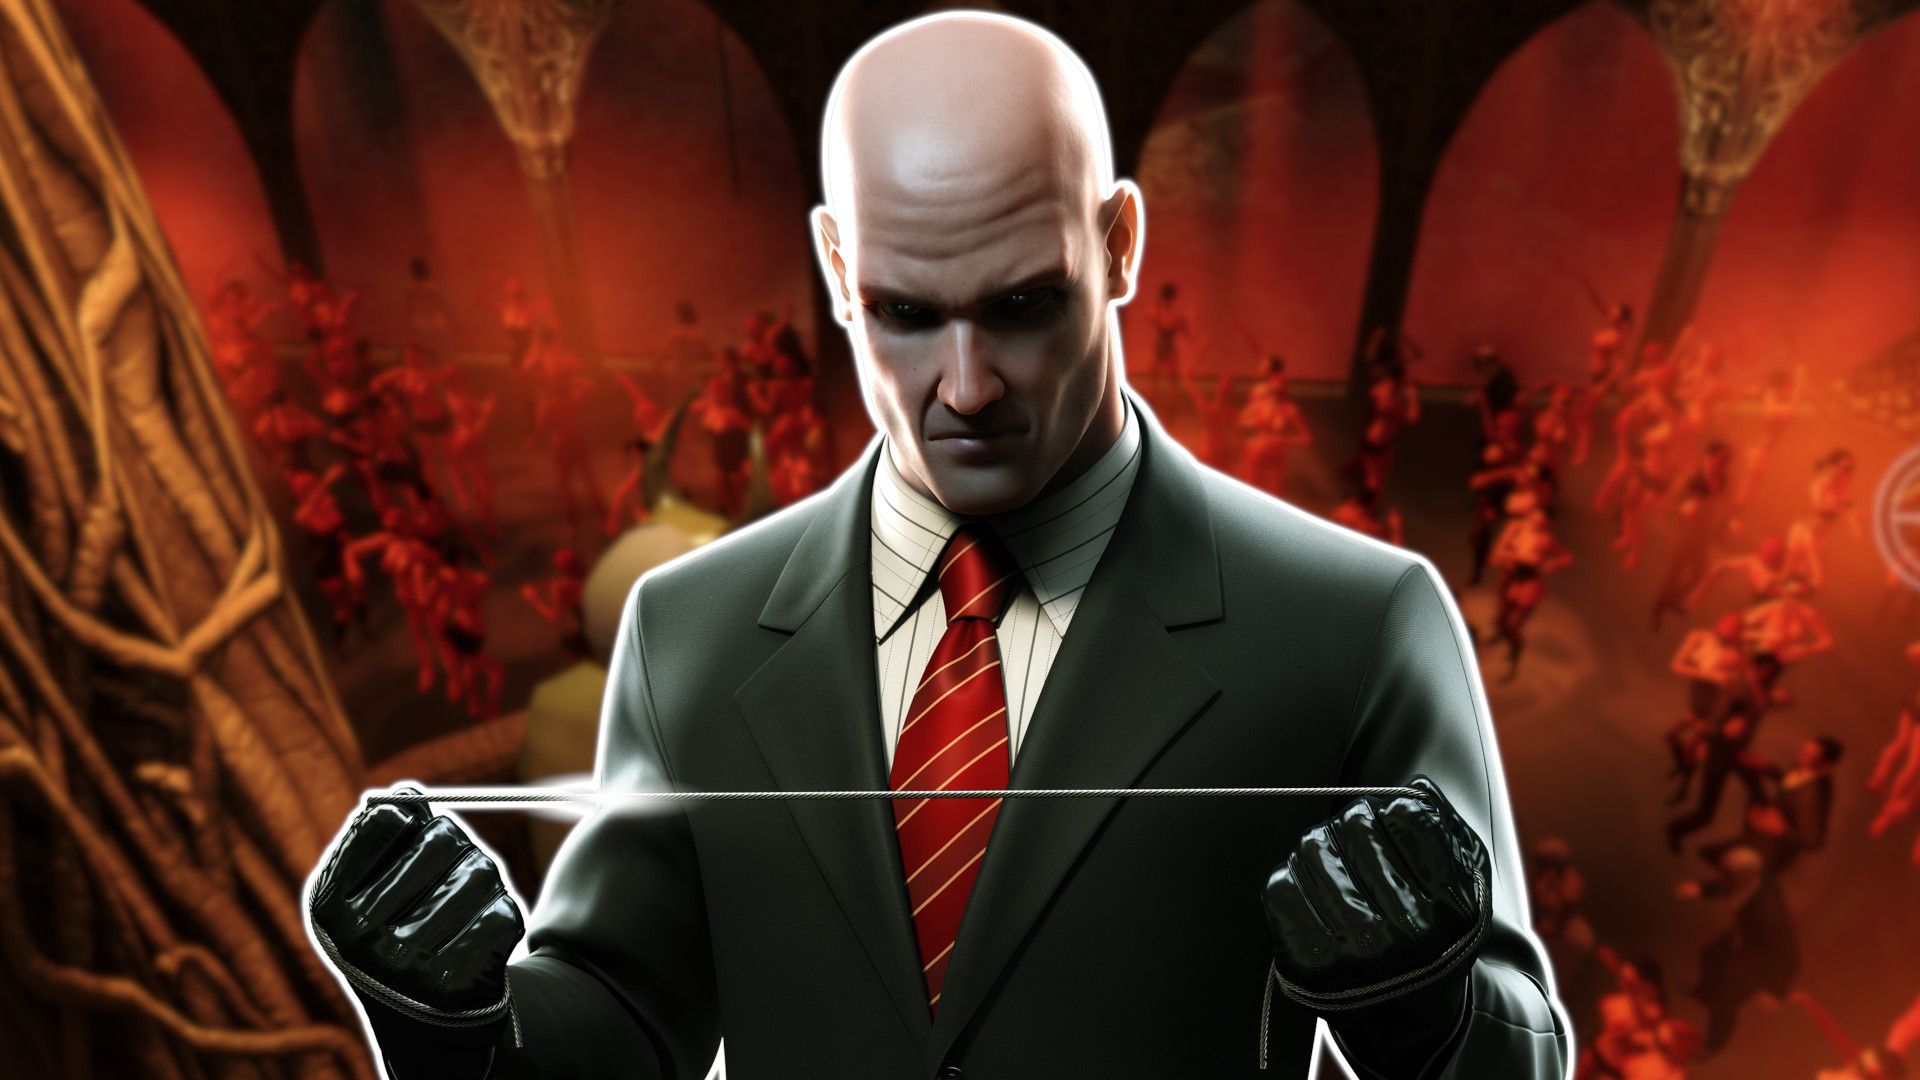 I just played Hitman: Blood Money Reprisal, it’s easily the best stealth game on Android